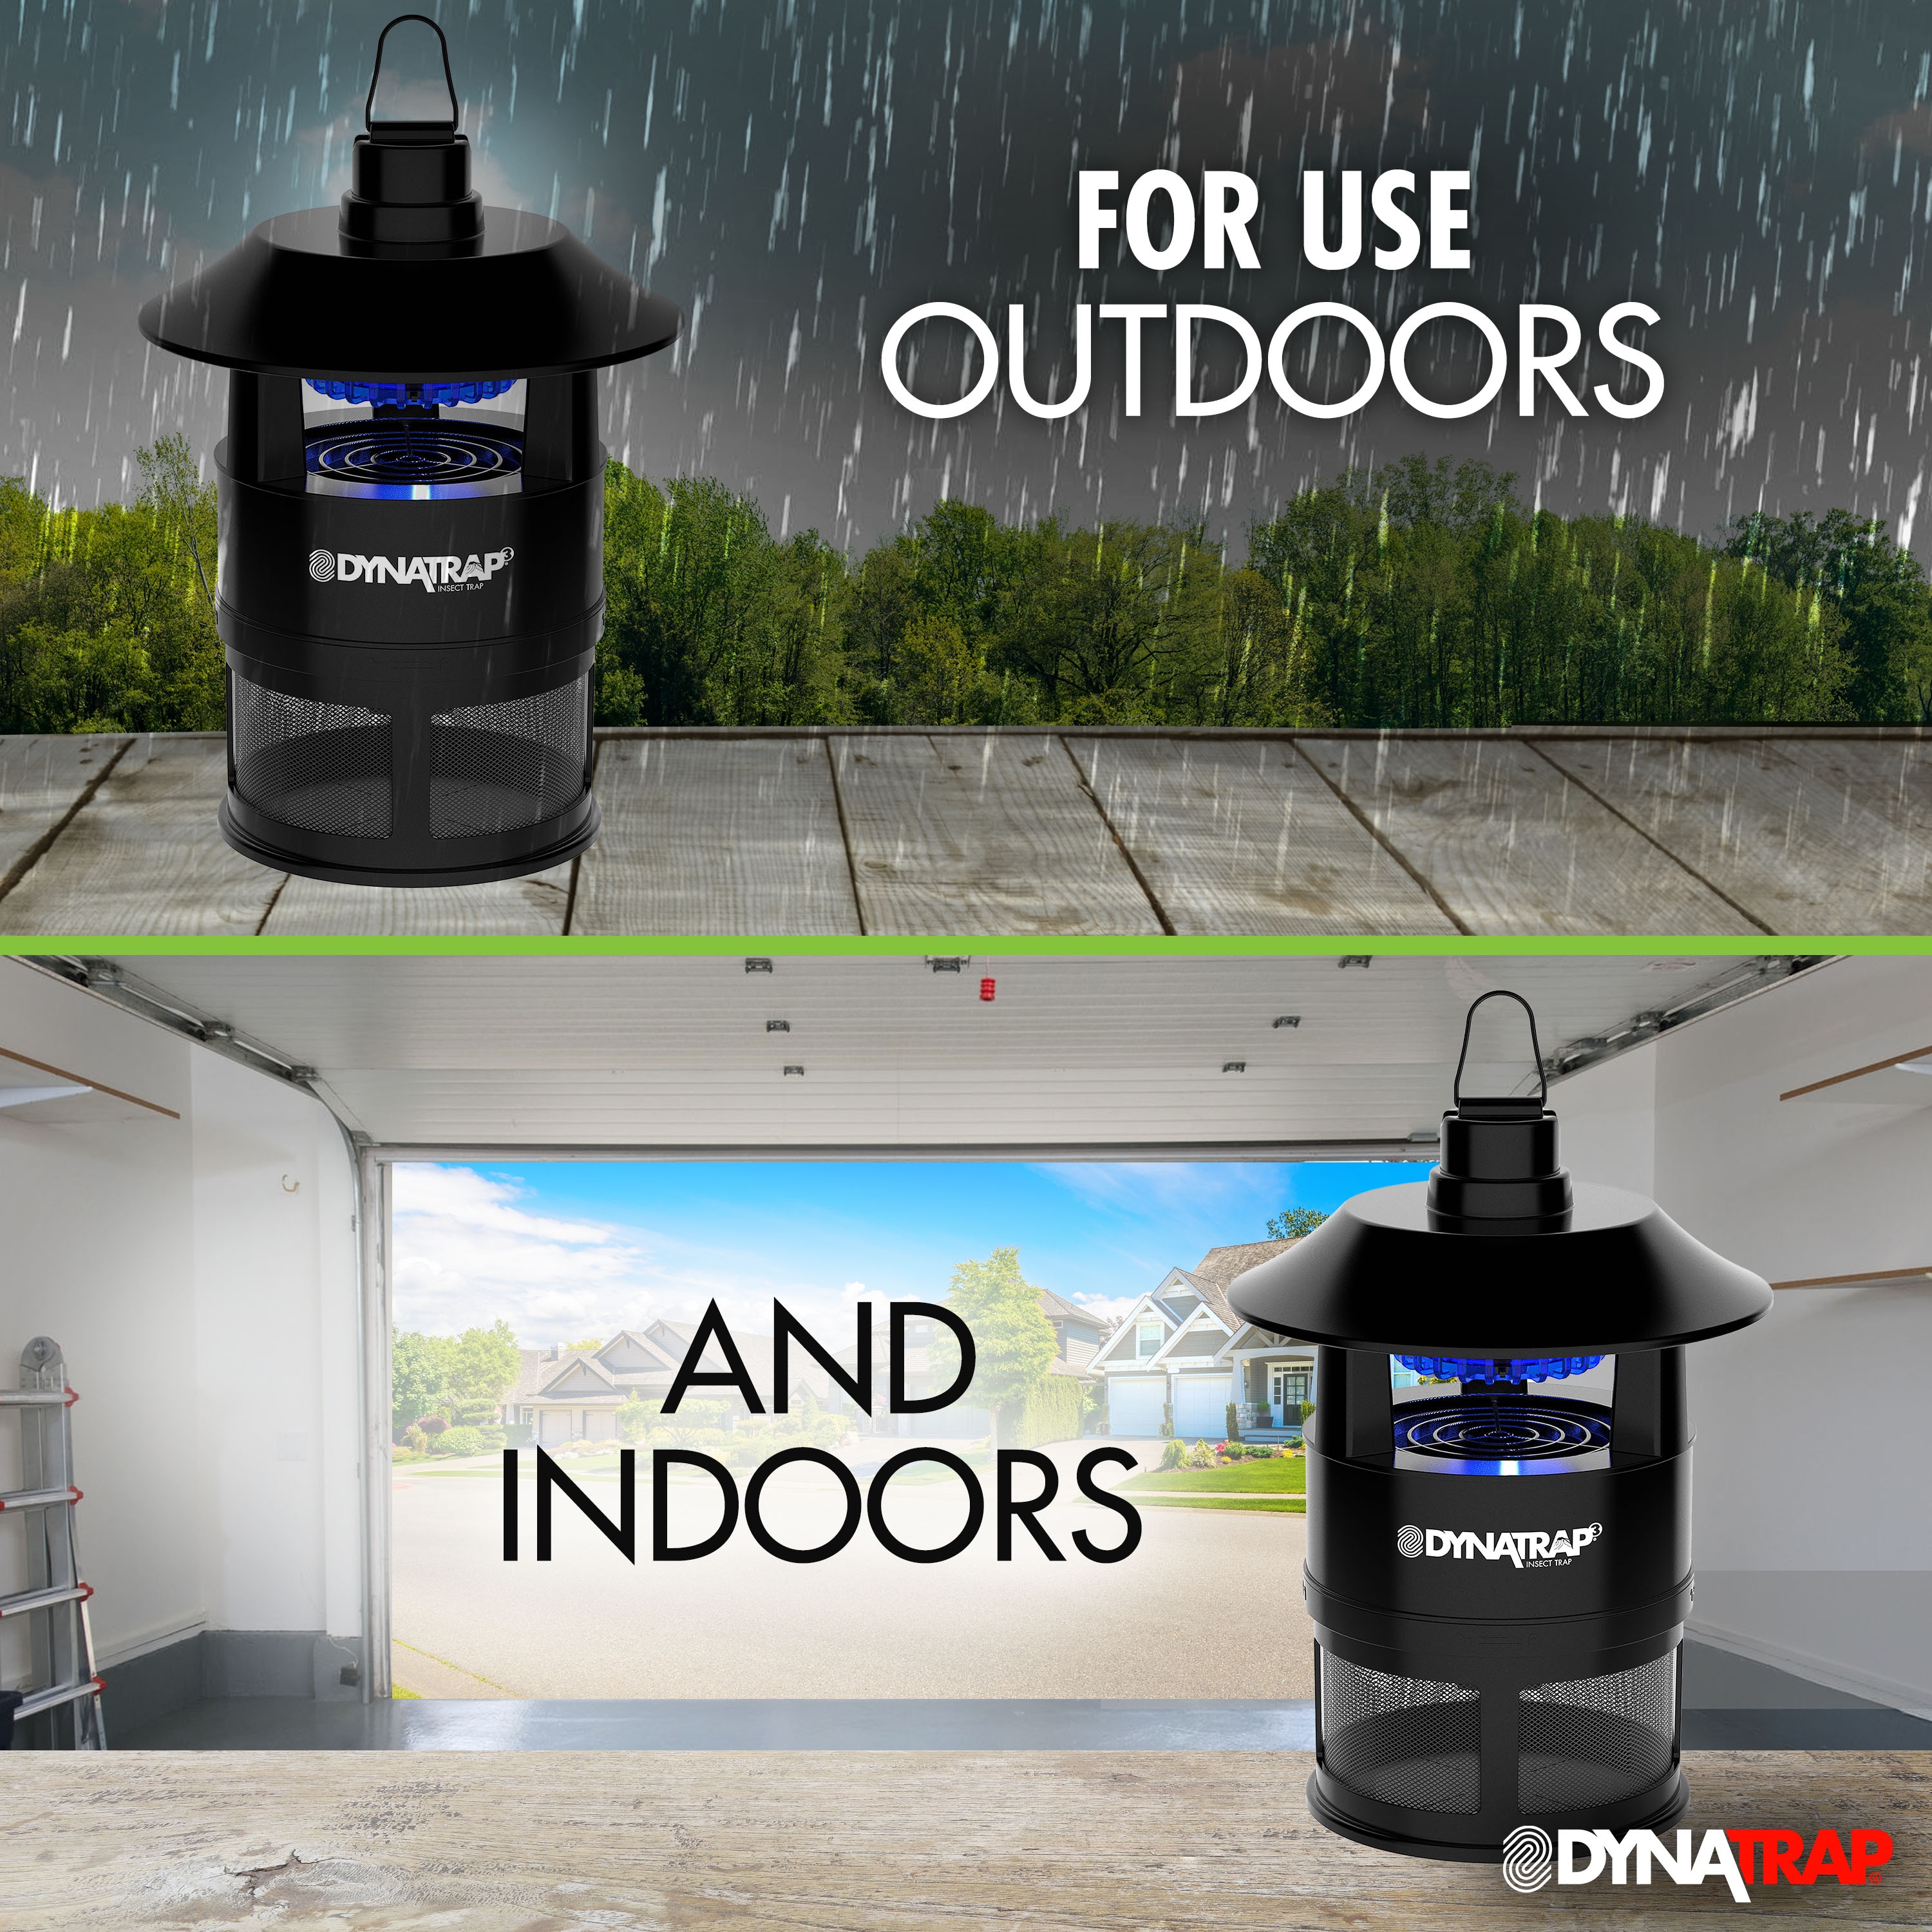 DynaTrap Indoor Mosquito & Insect Traps